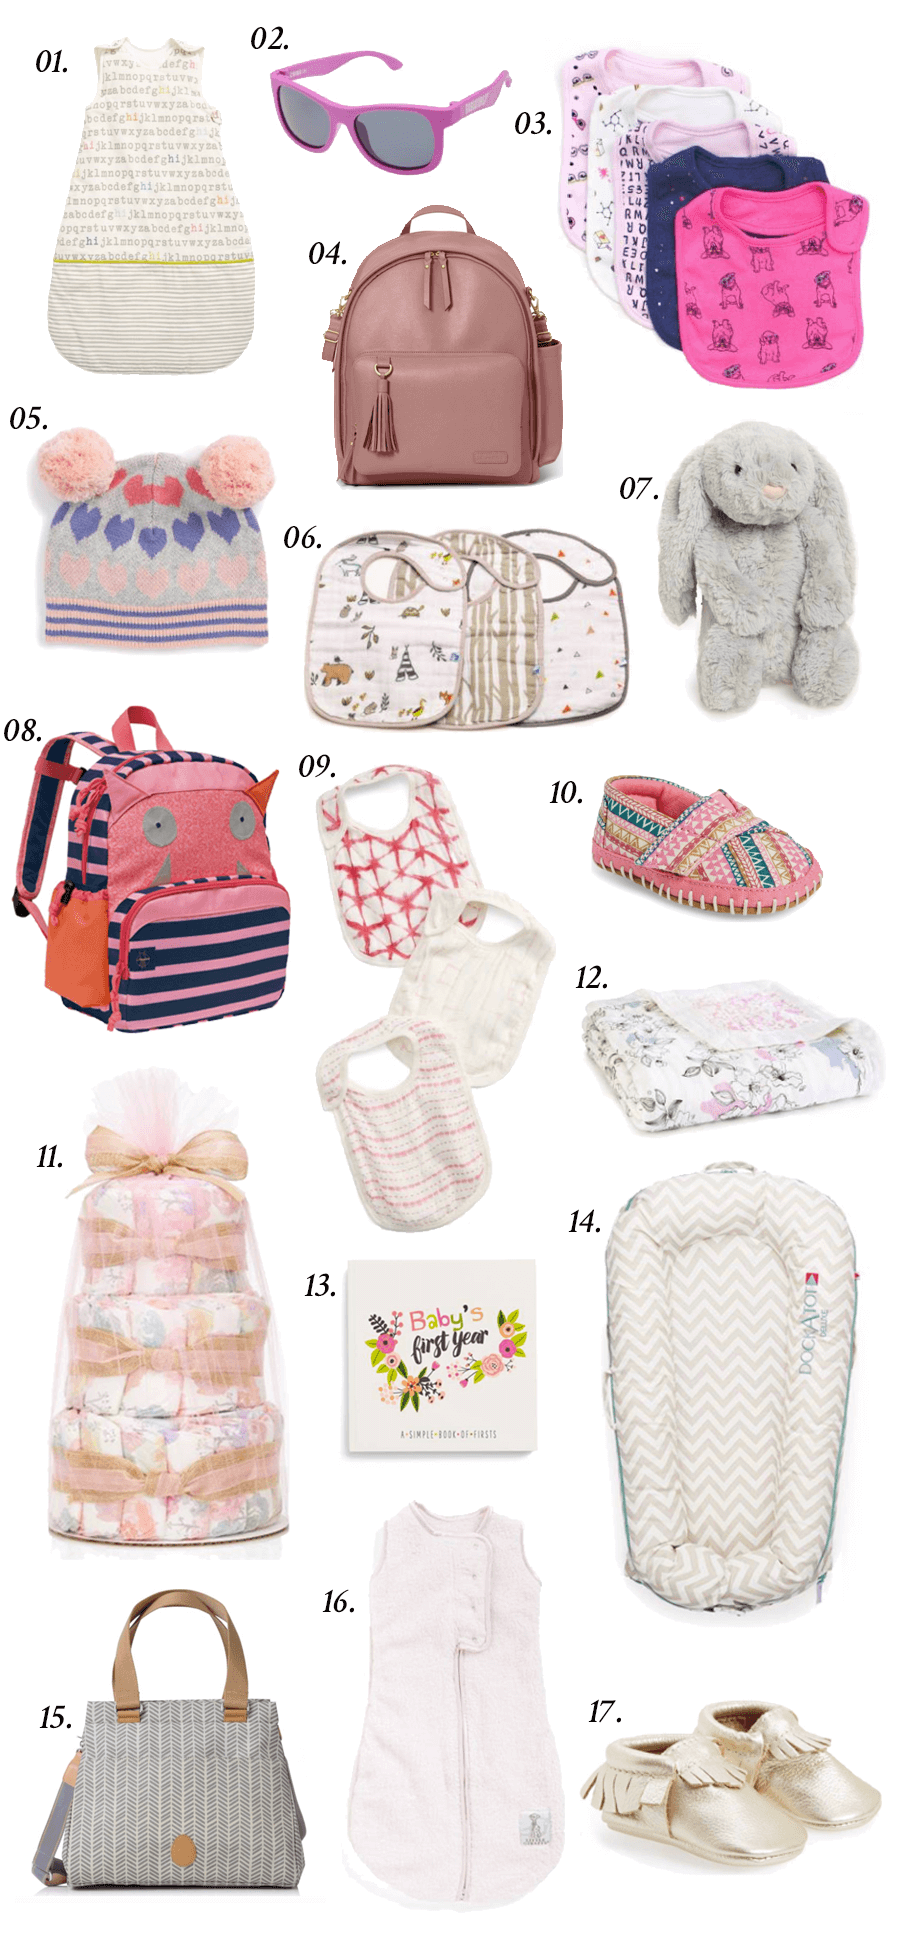 Baby Gifts, Baby Shower, Gift Guides, Kids